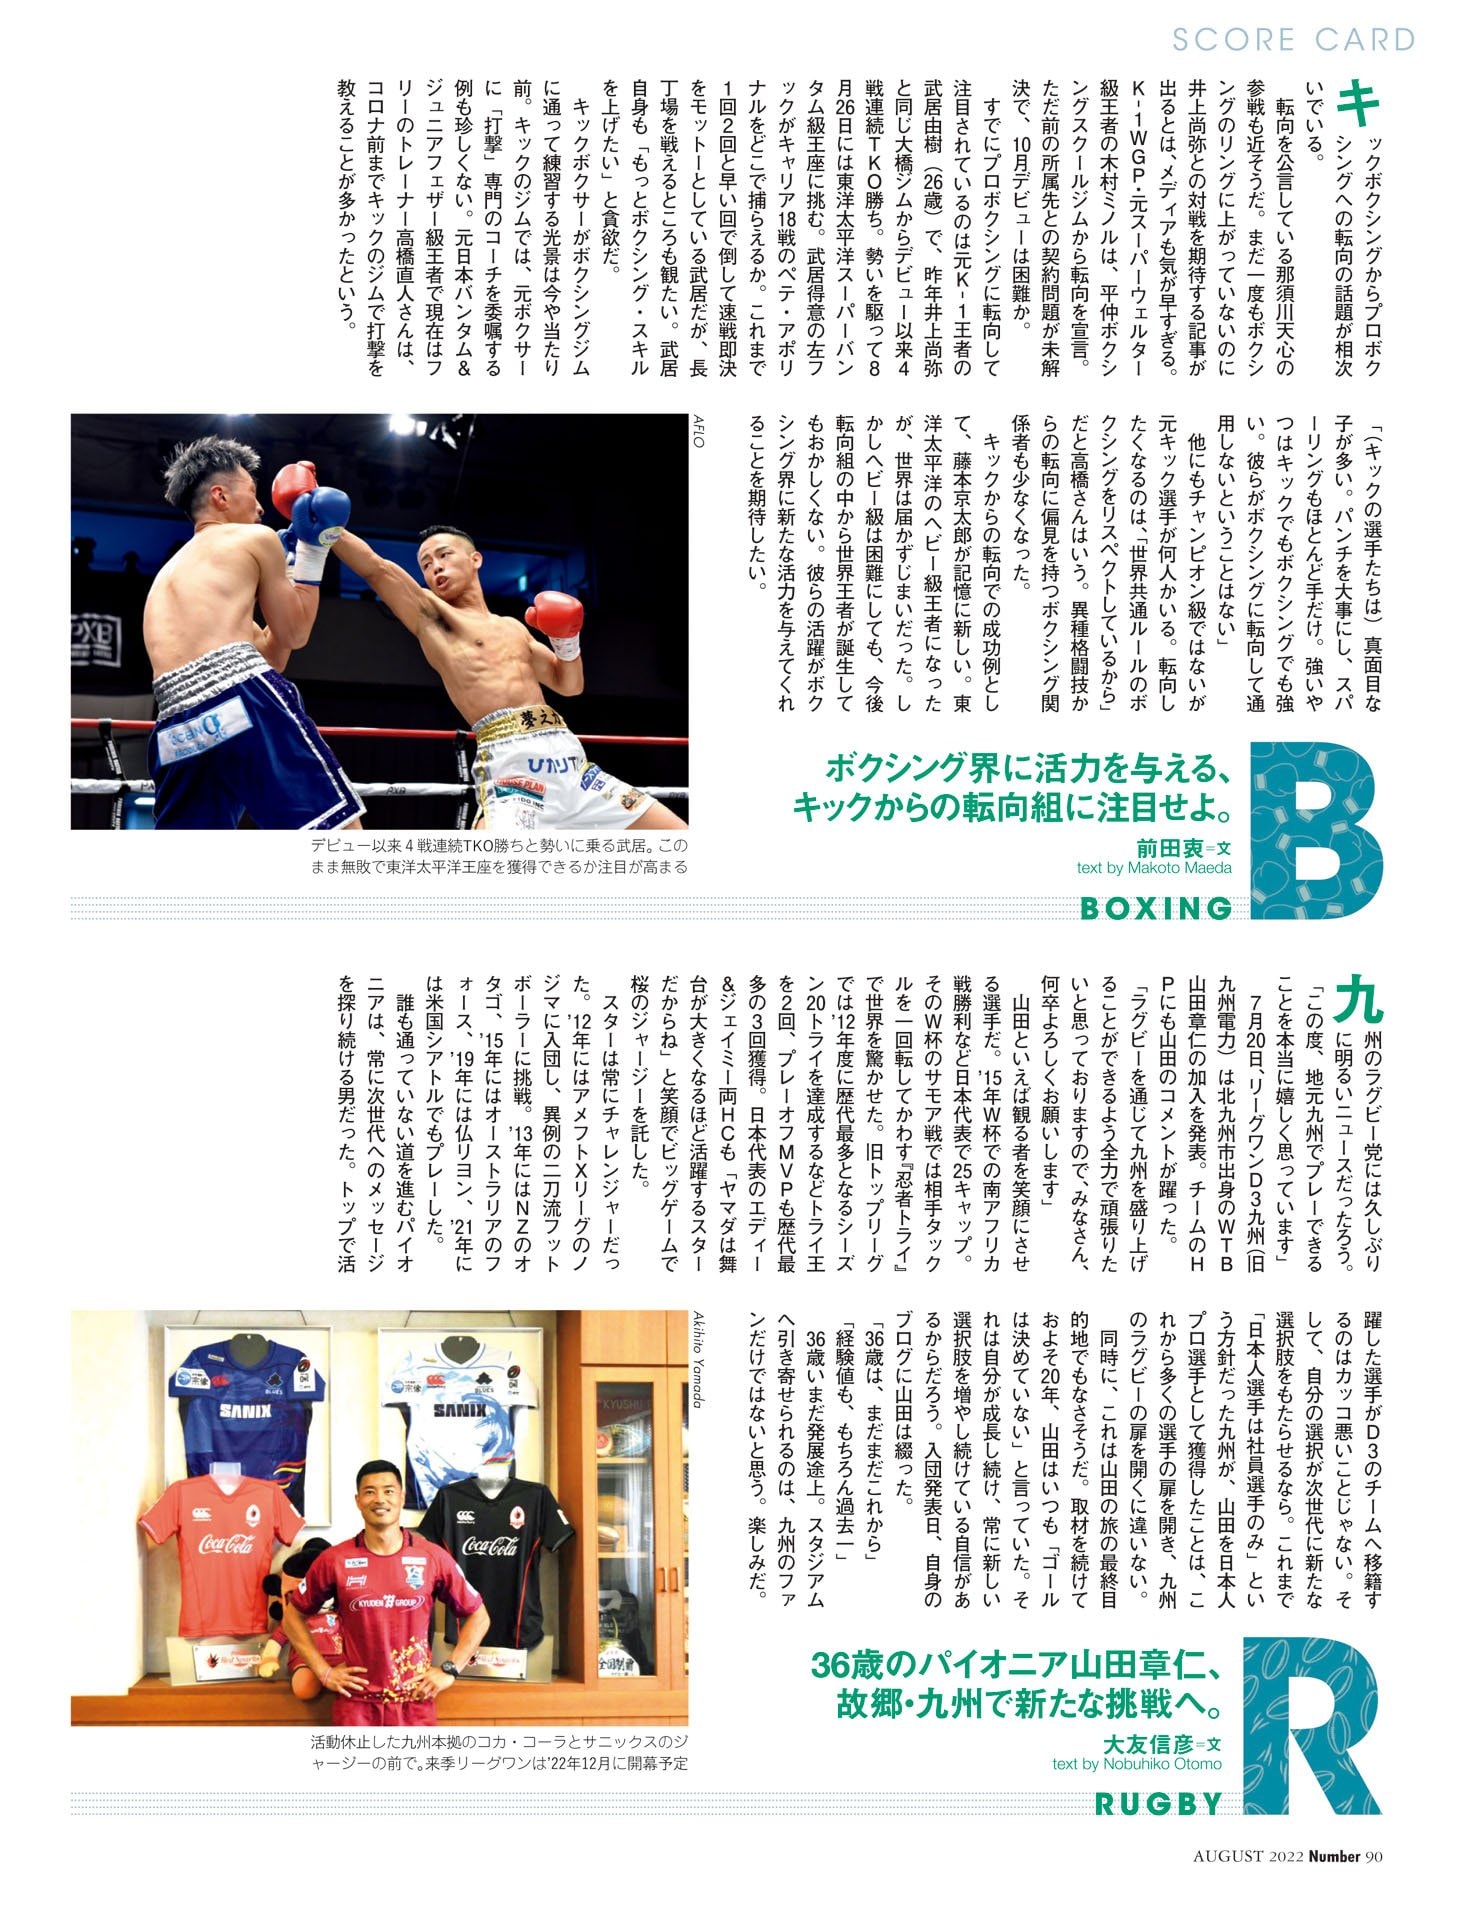 【SCORE CARD】BOXING／RUGBY